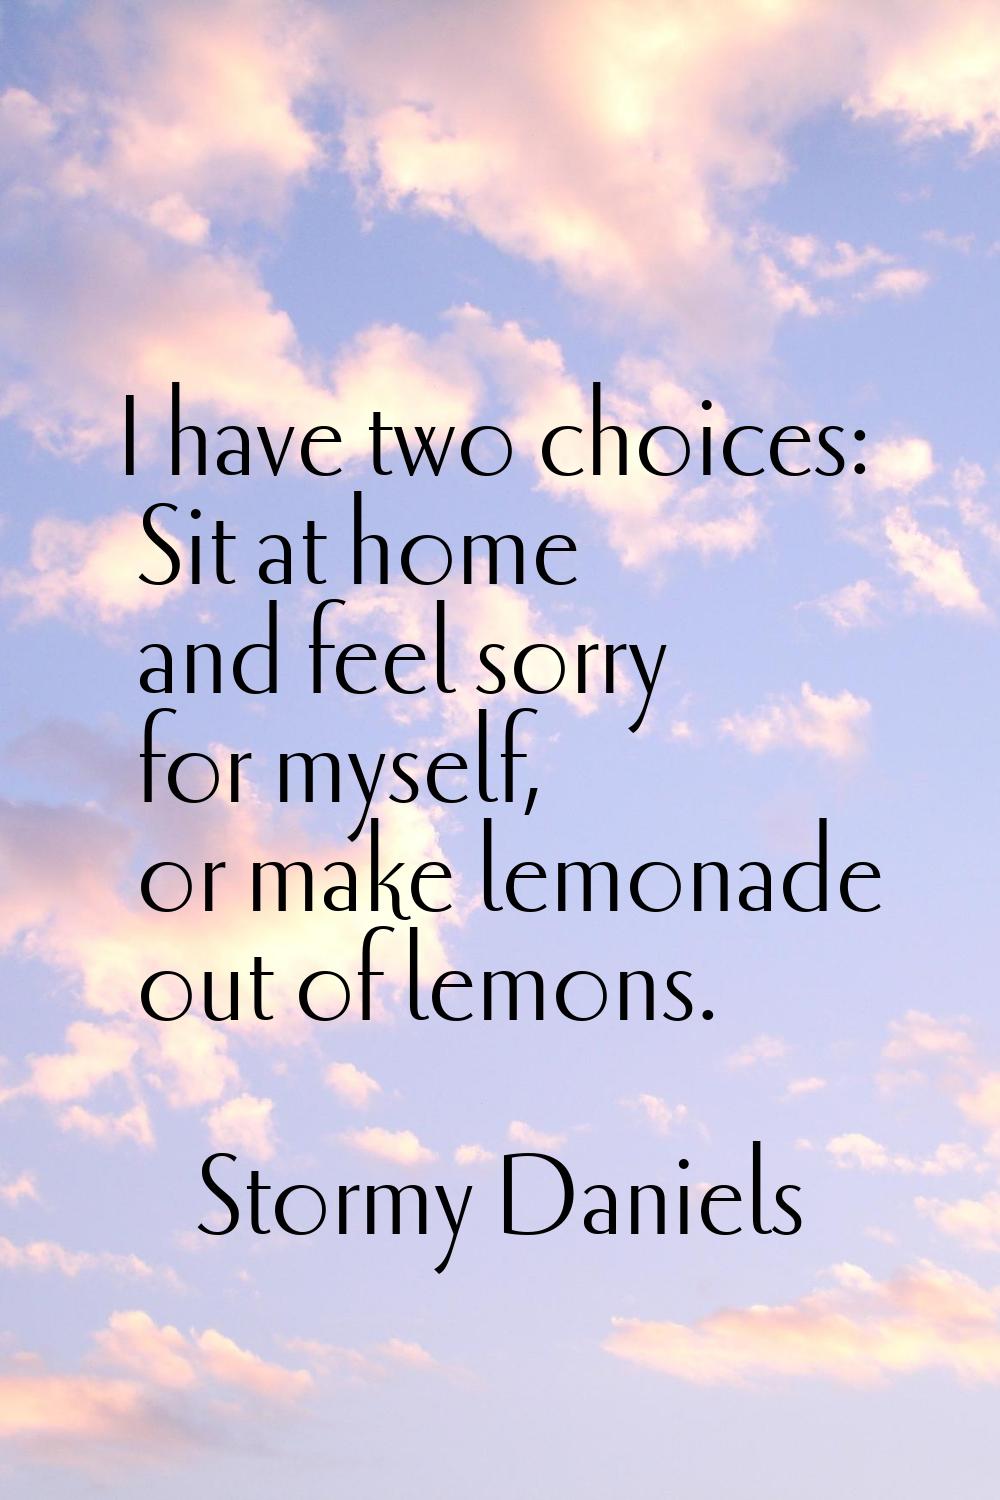 I have two choices: Sit at home and feel sorry for myself, or make lemonade out of lemons.